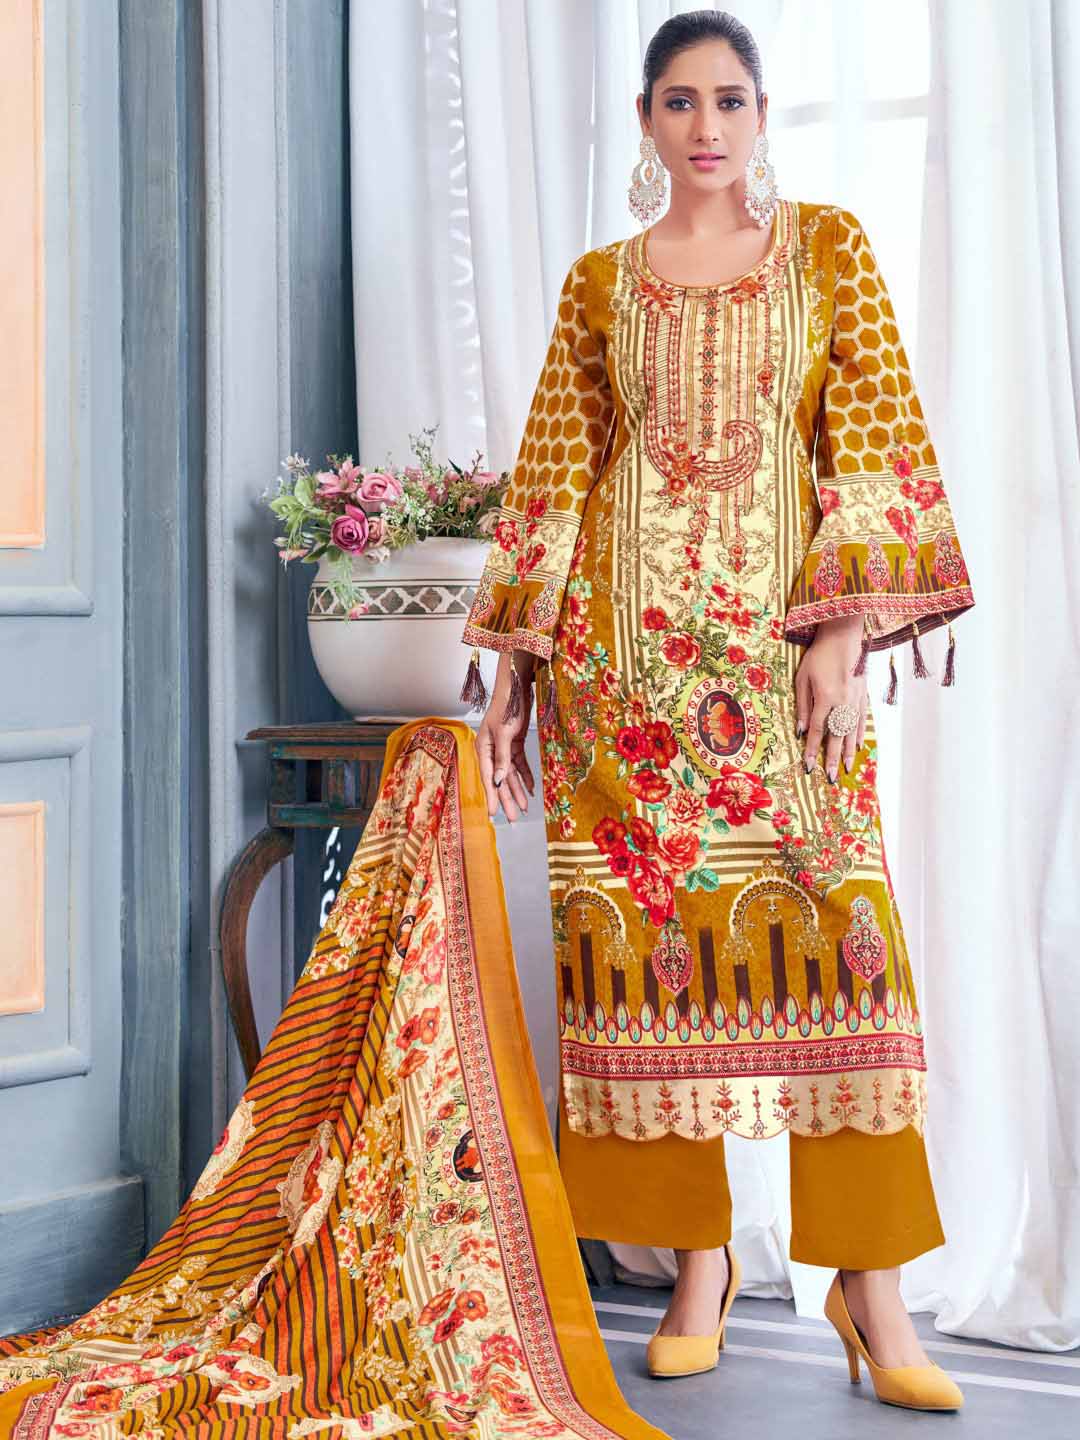 Unstitched Pakistani Print Cotton Suit Fabric with Embroidery Beige Alok Suit